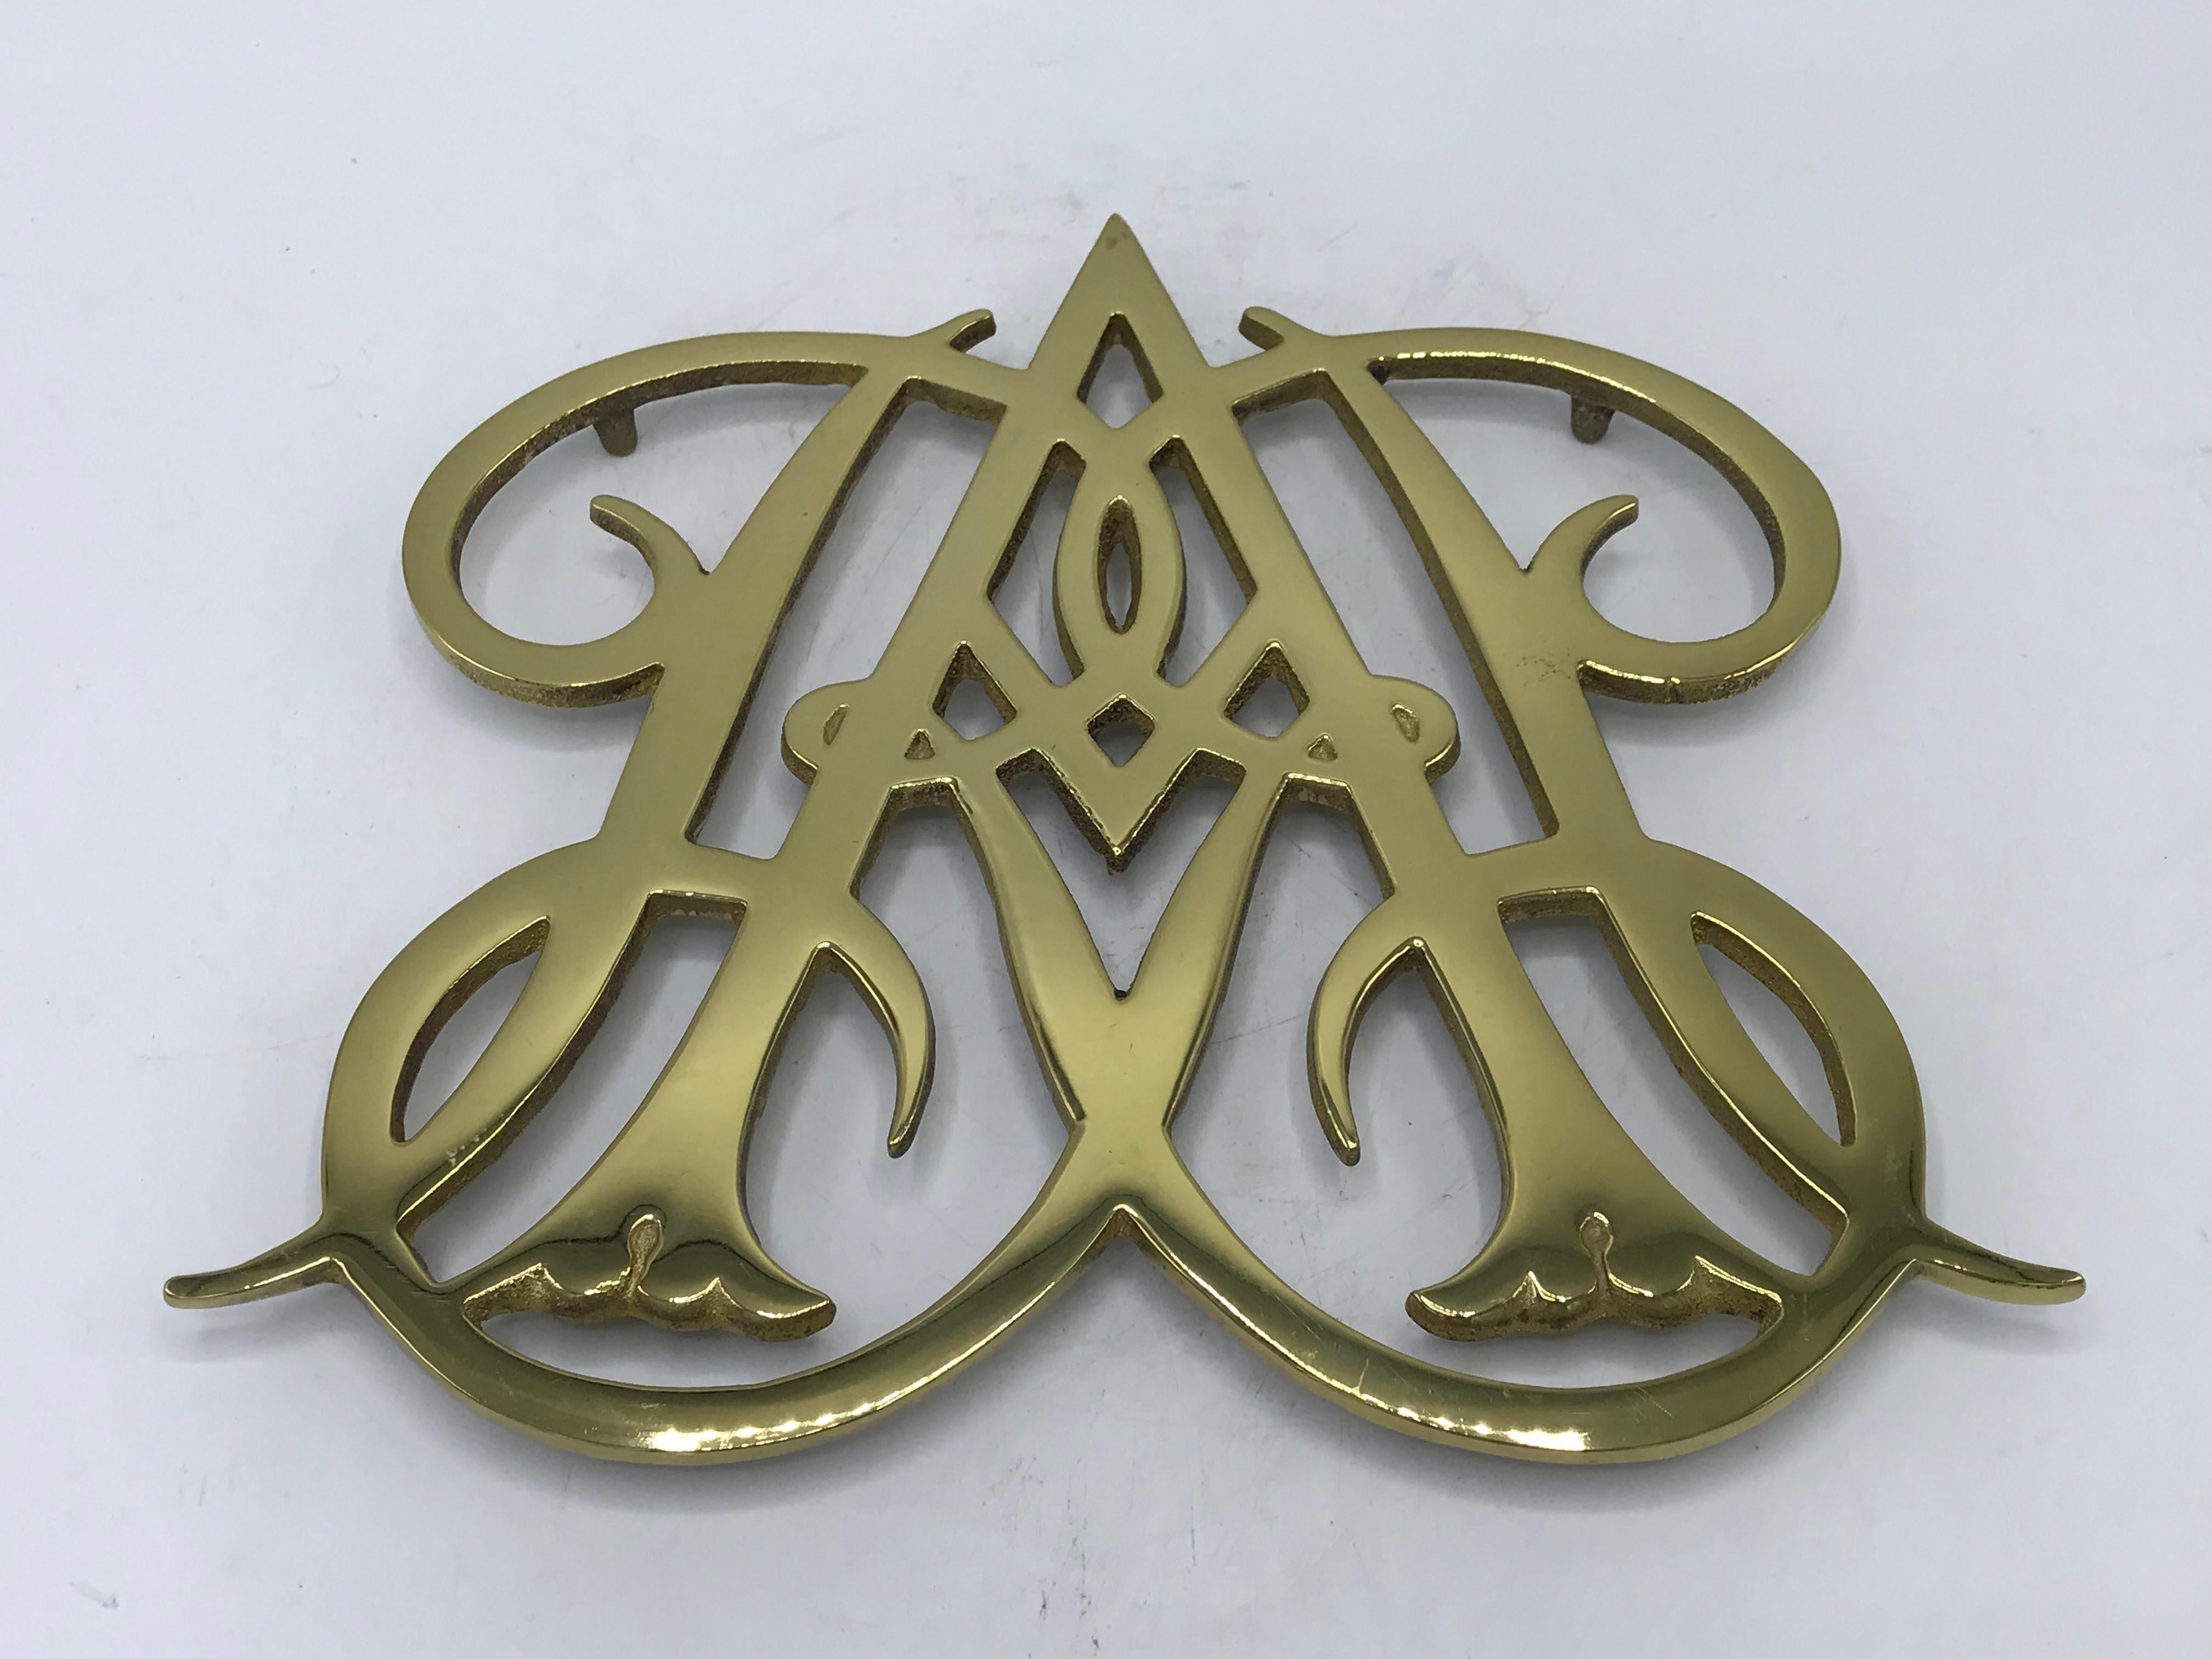 Offered is an iconic and traditional, Virginia Metalcrafters solid-brass, 'Queen Ann Cypher of Williamsburg' trivet, circa 1950s. Would be beautiful for intended use, plant stand, or as tabletop decor. Marked on backside with Virginia Metalcrafters